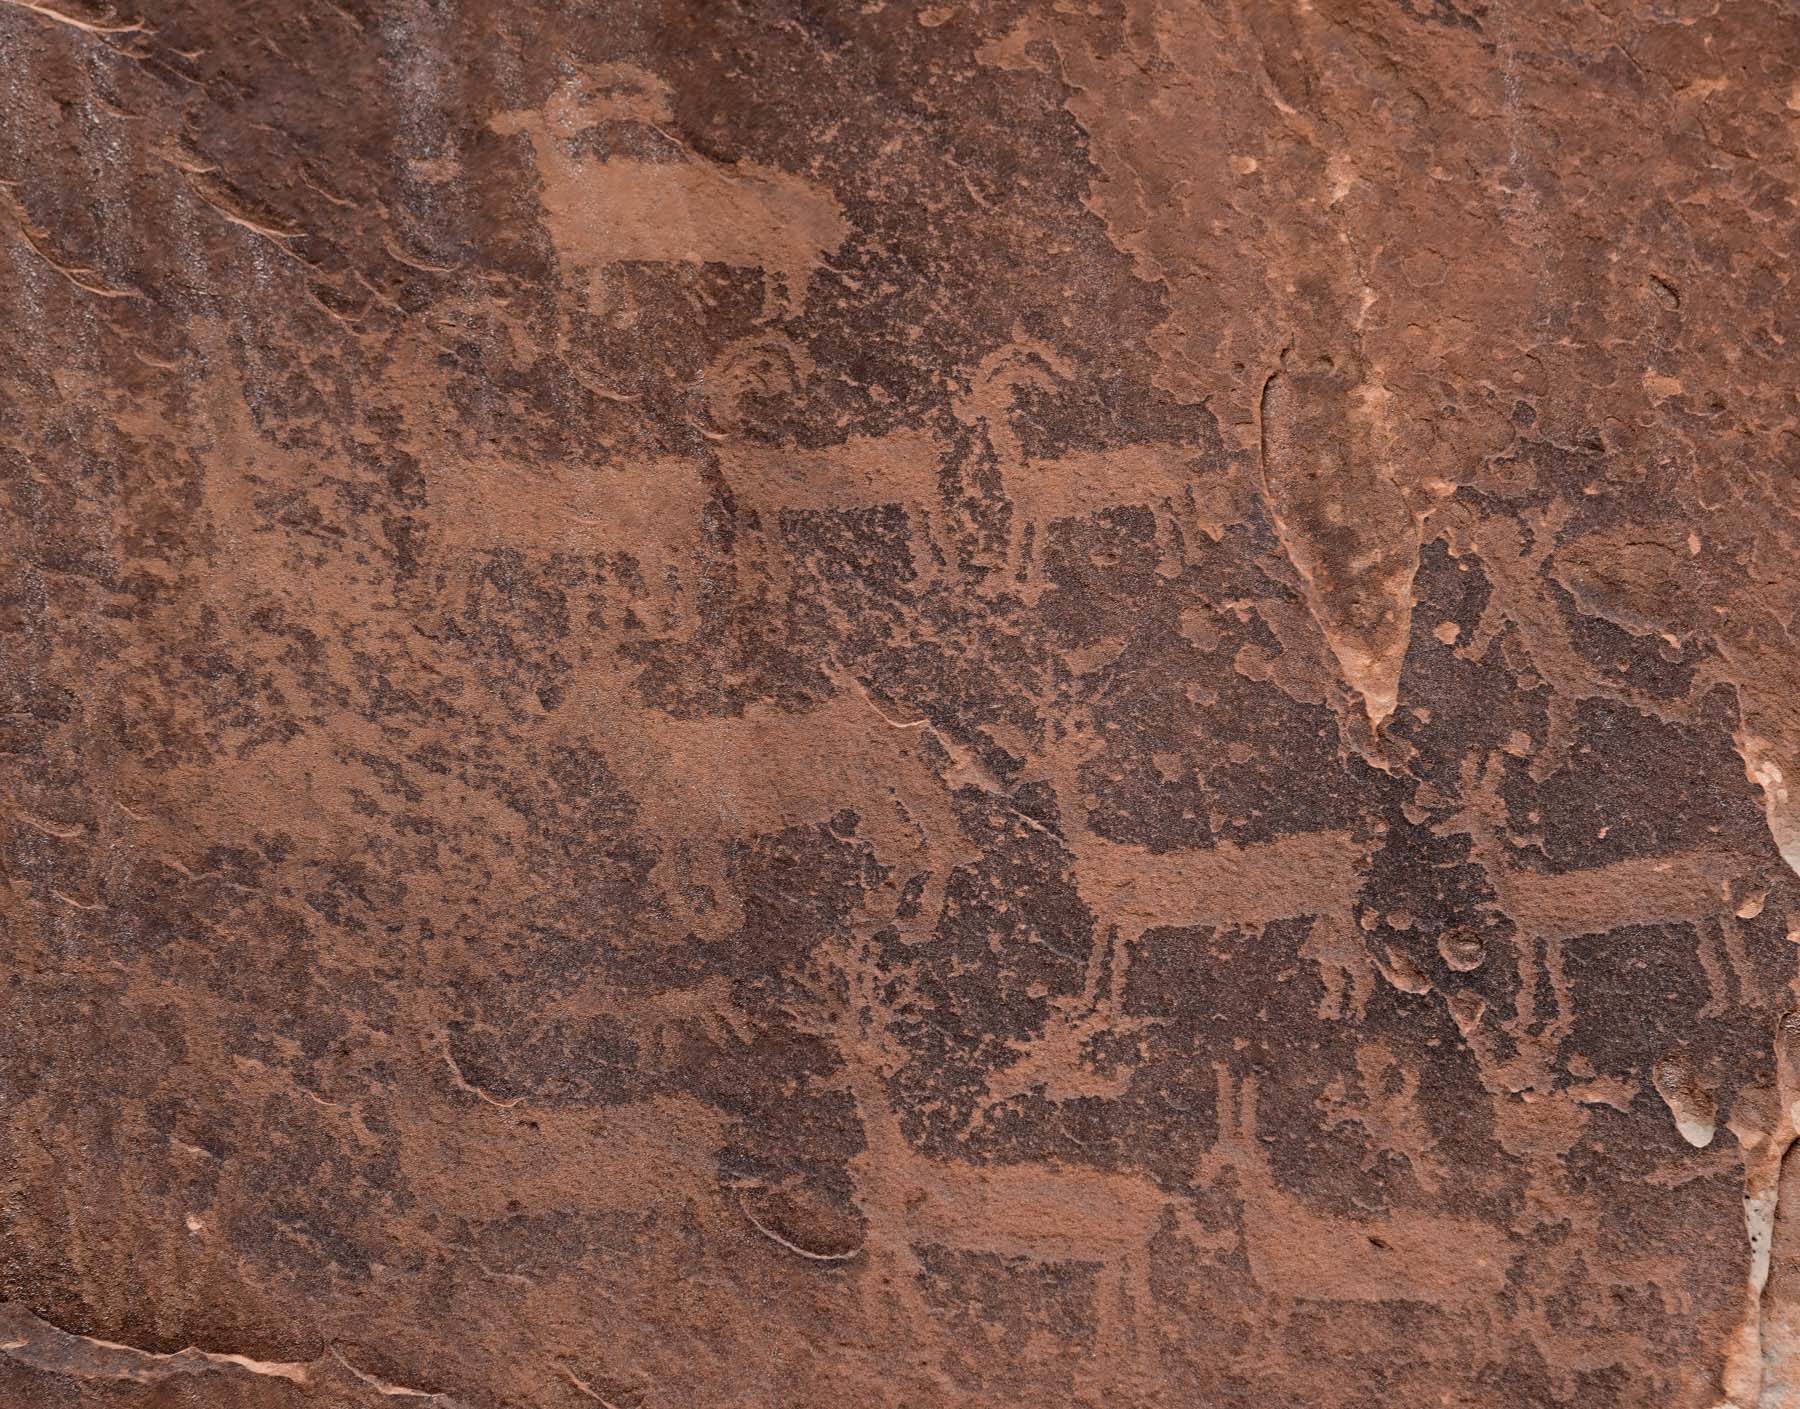 Petroglyphs at The White Pocket in Vermilion Cliffs National Monument